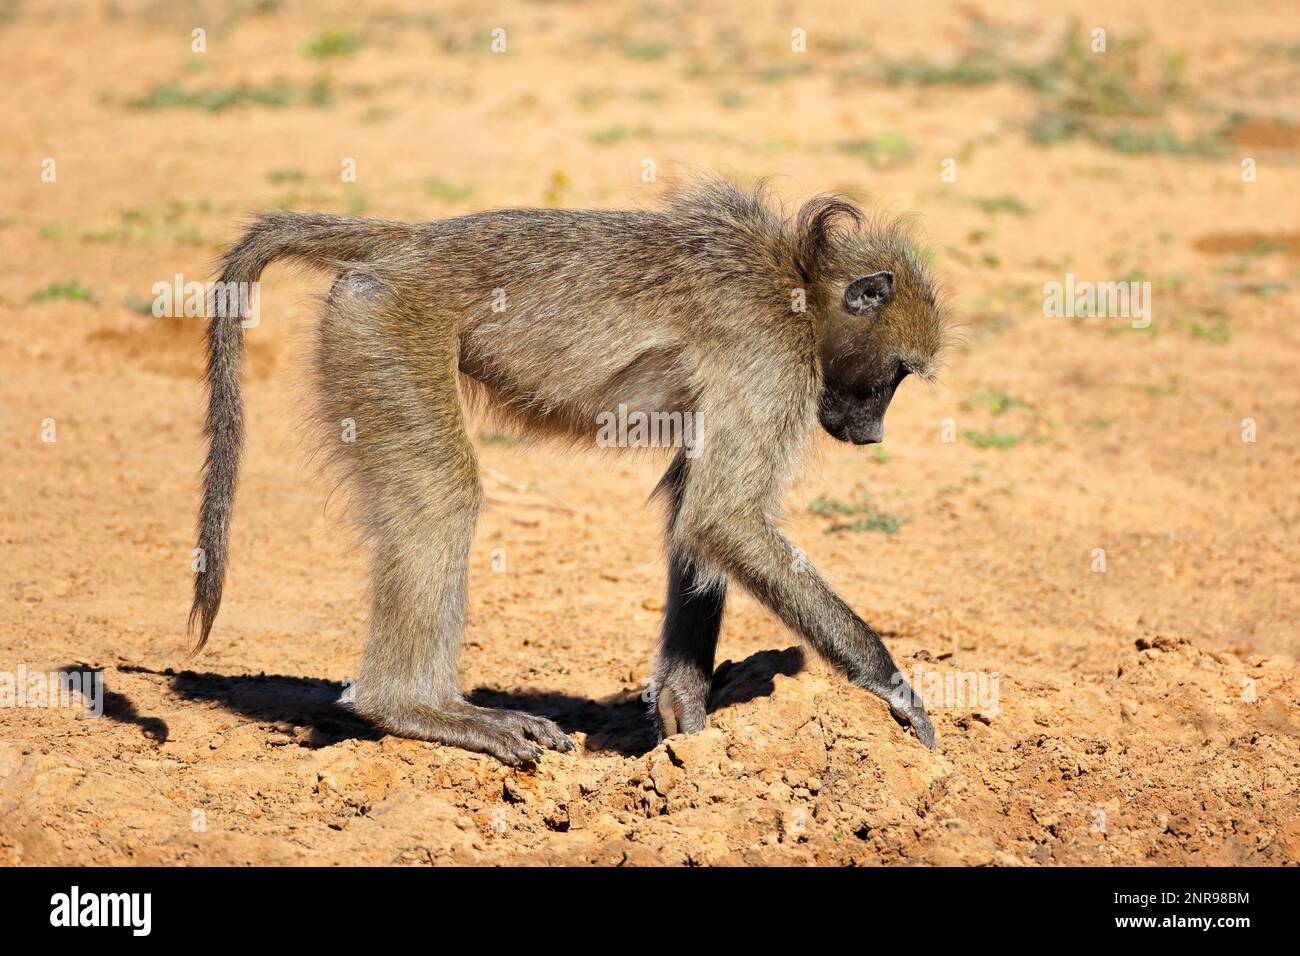 A chacma baboon (Papio ursinus) foraging, Mkuze game reserve, South Africa Stock Photo